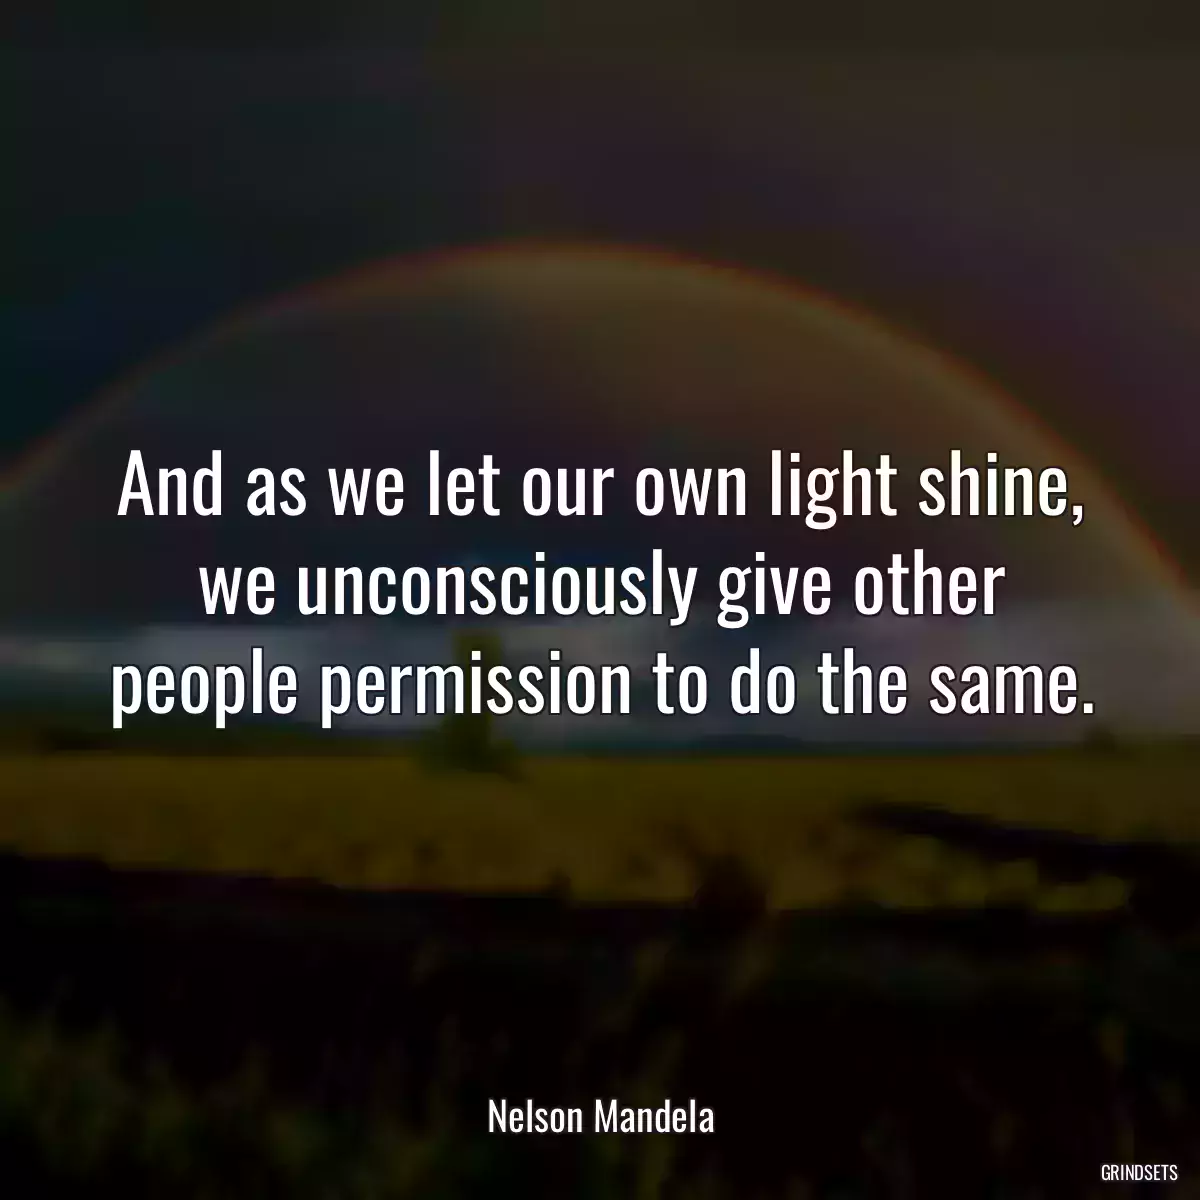 And as we let our own light shine, we unconsciously give other people permission to do the same.